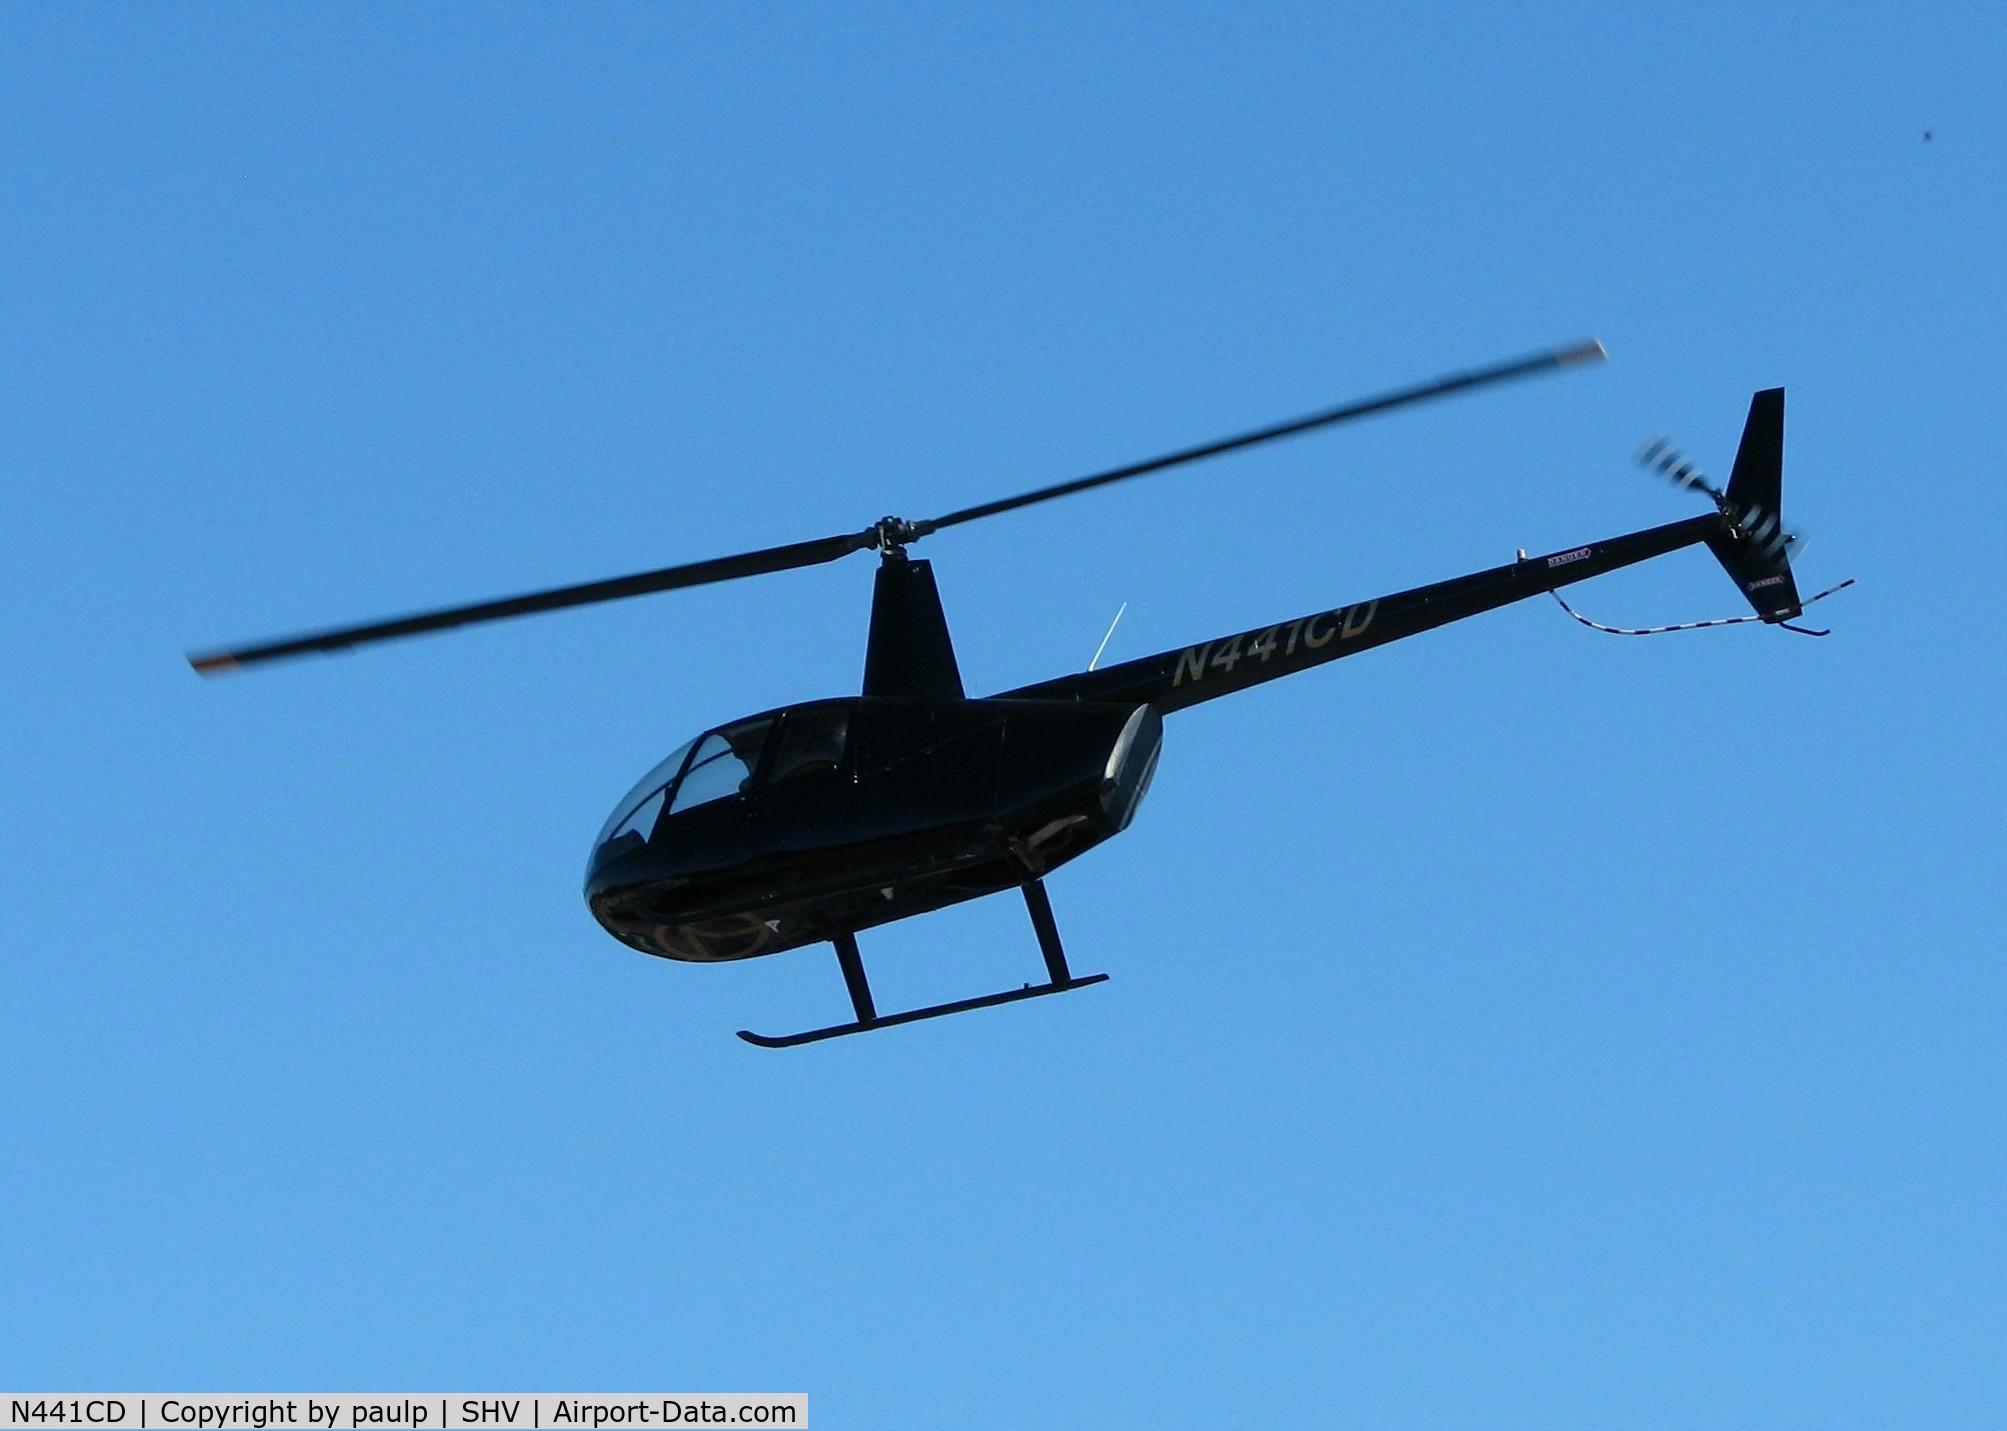 N441CD, Robinson R44 II C/N 12878, Giving rides at the Louisiana State Fair in Shreveport.